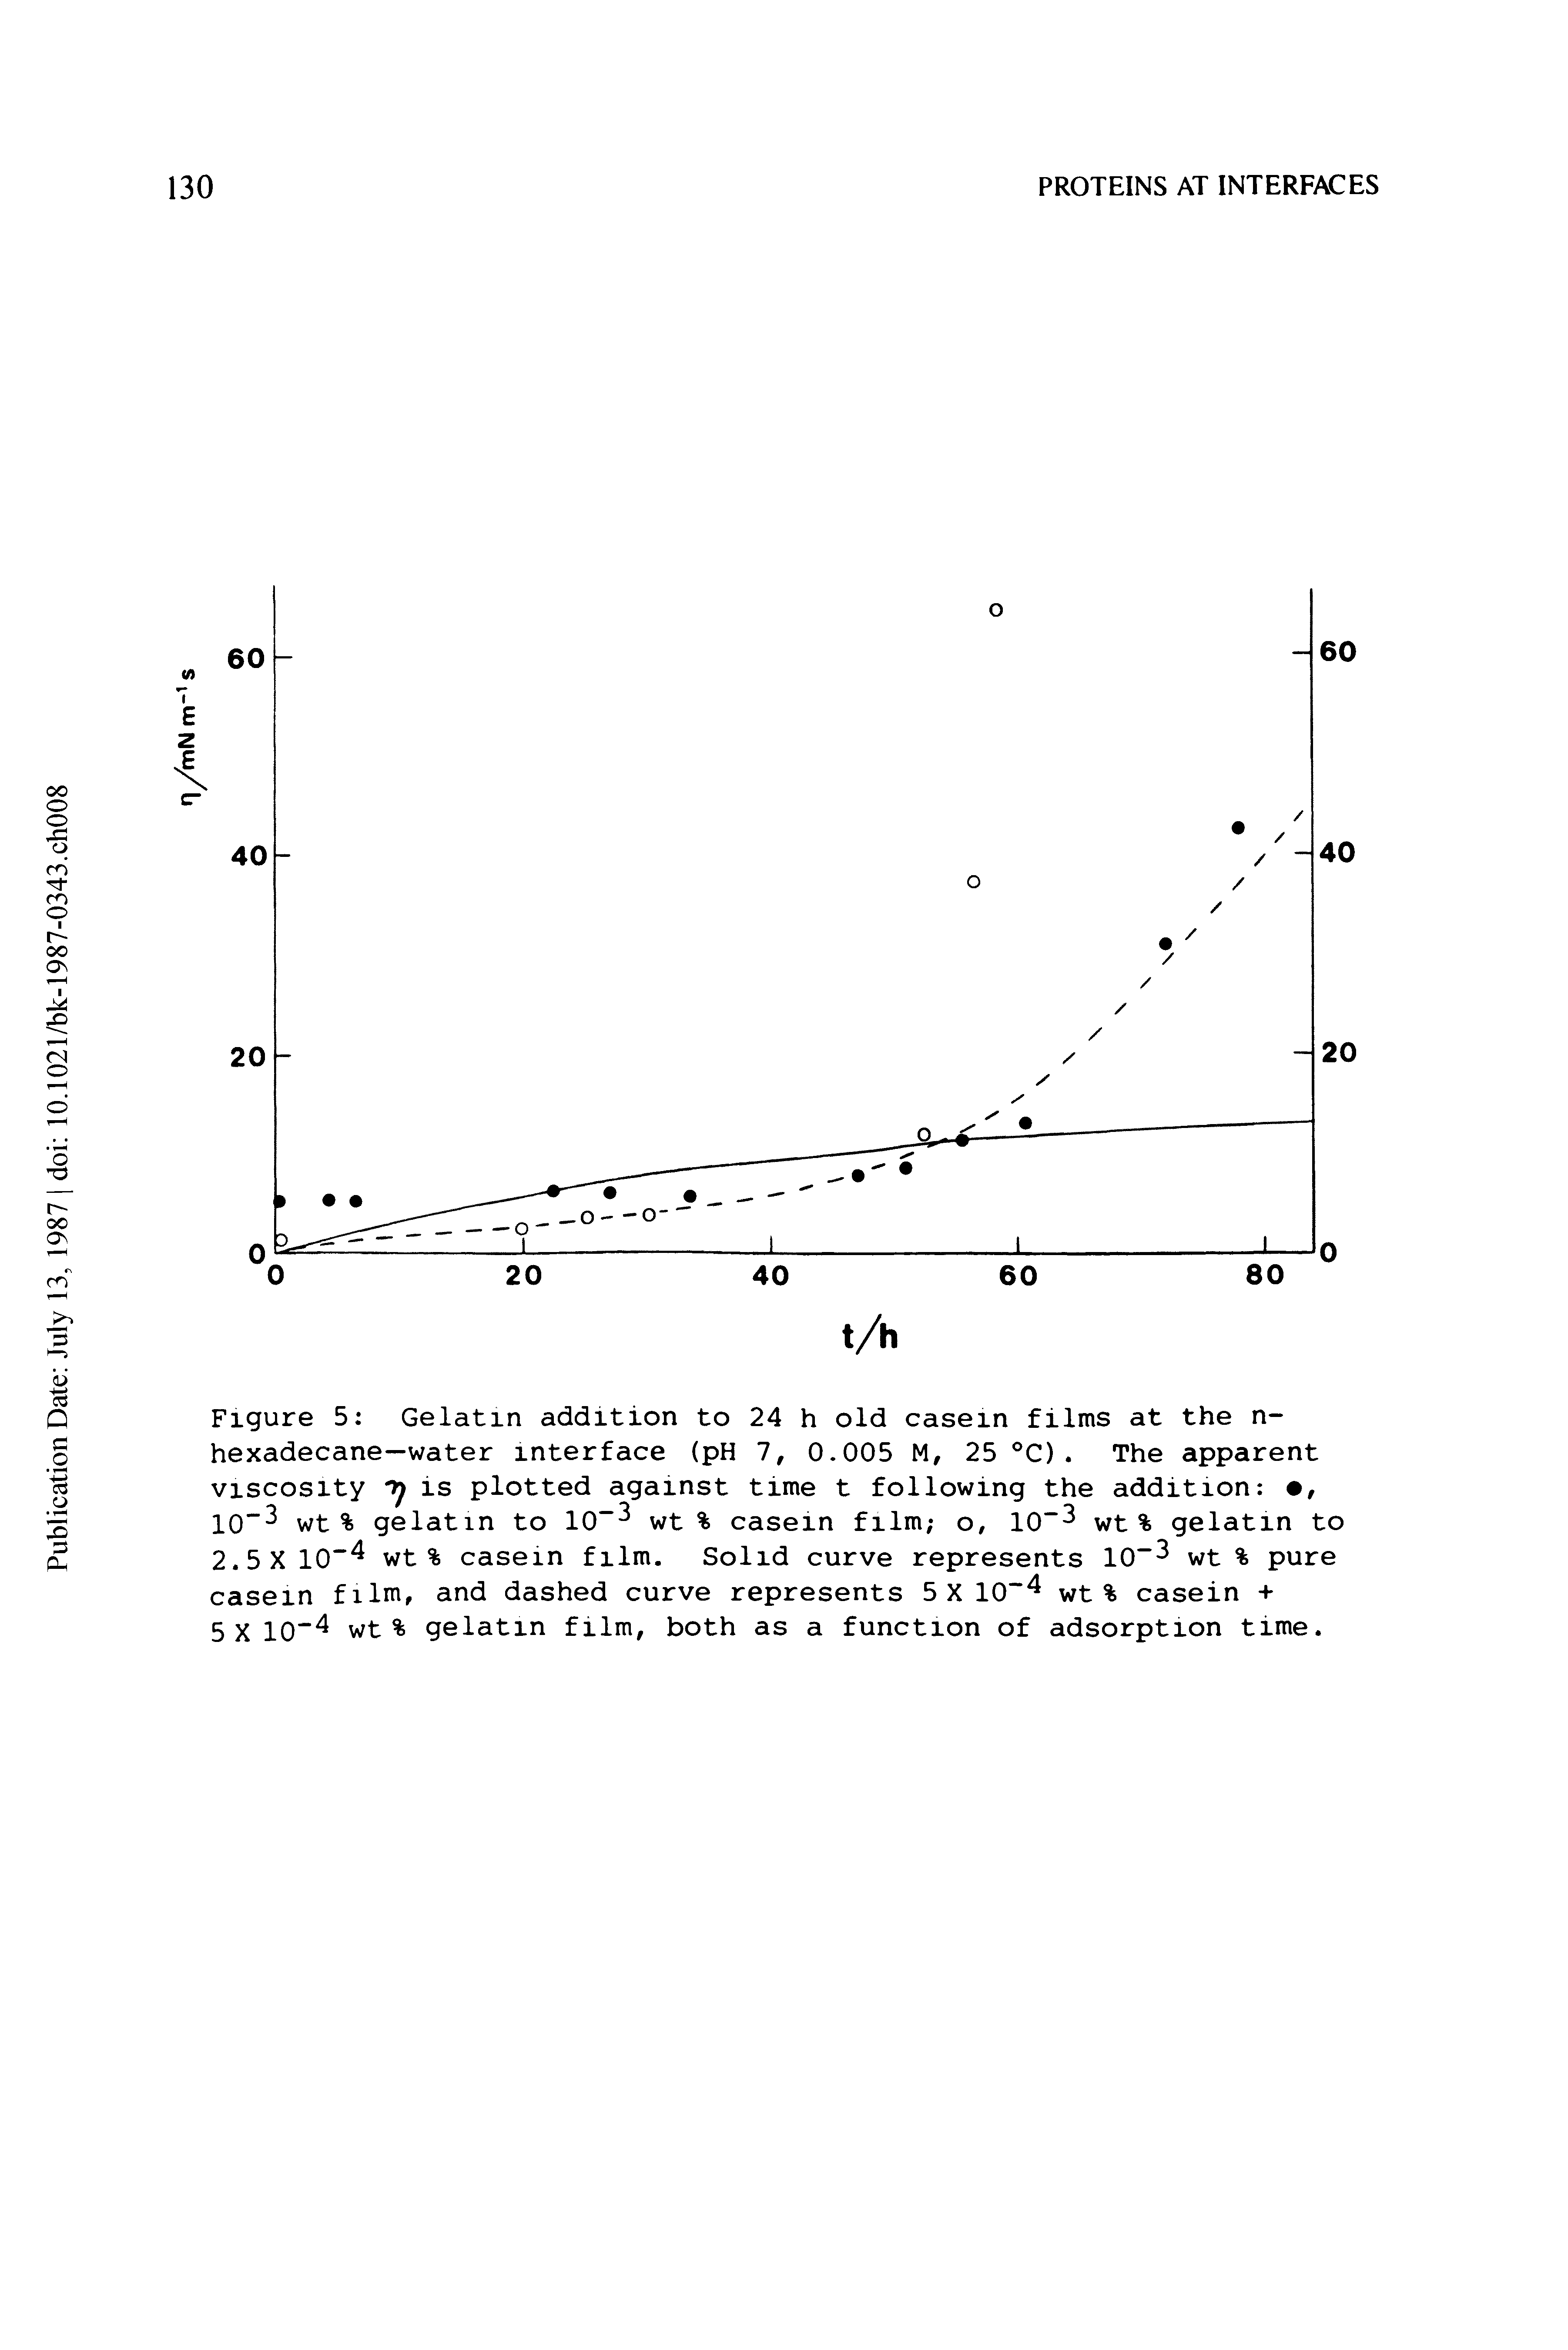 Figure 5 Gelatin addition to 24 h old casein films at the n-hexadecane—water interface (pH 1, 0.005 M, 25 °C). The apparent viscosity nj is plotted against time t following the addition , 10 wt % gelatin to 10 wt % casein film o, 10" wt % gelatin to 2.5X 10 wt% casein film. Solid curve represents 10 wt % pure casein film, and dashed curve represents 5X10 wt % casein +...